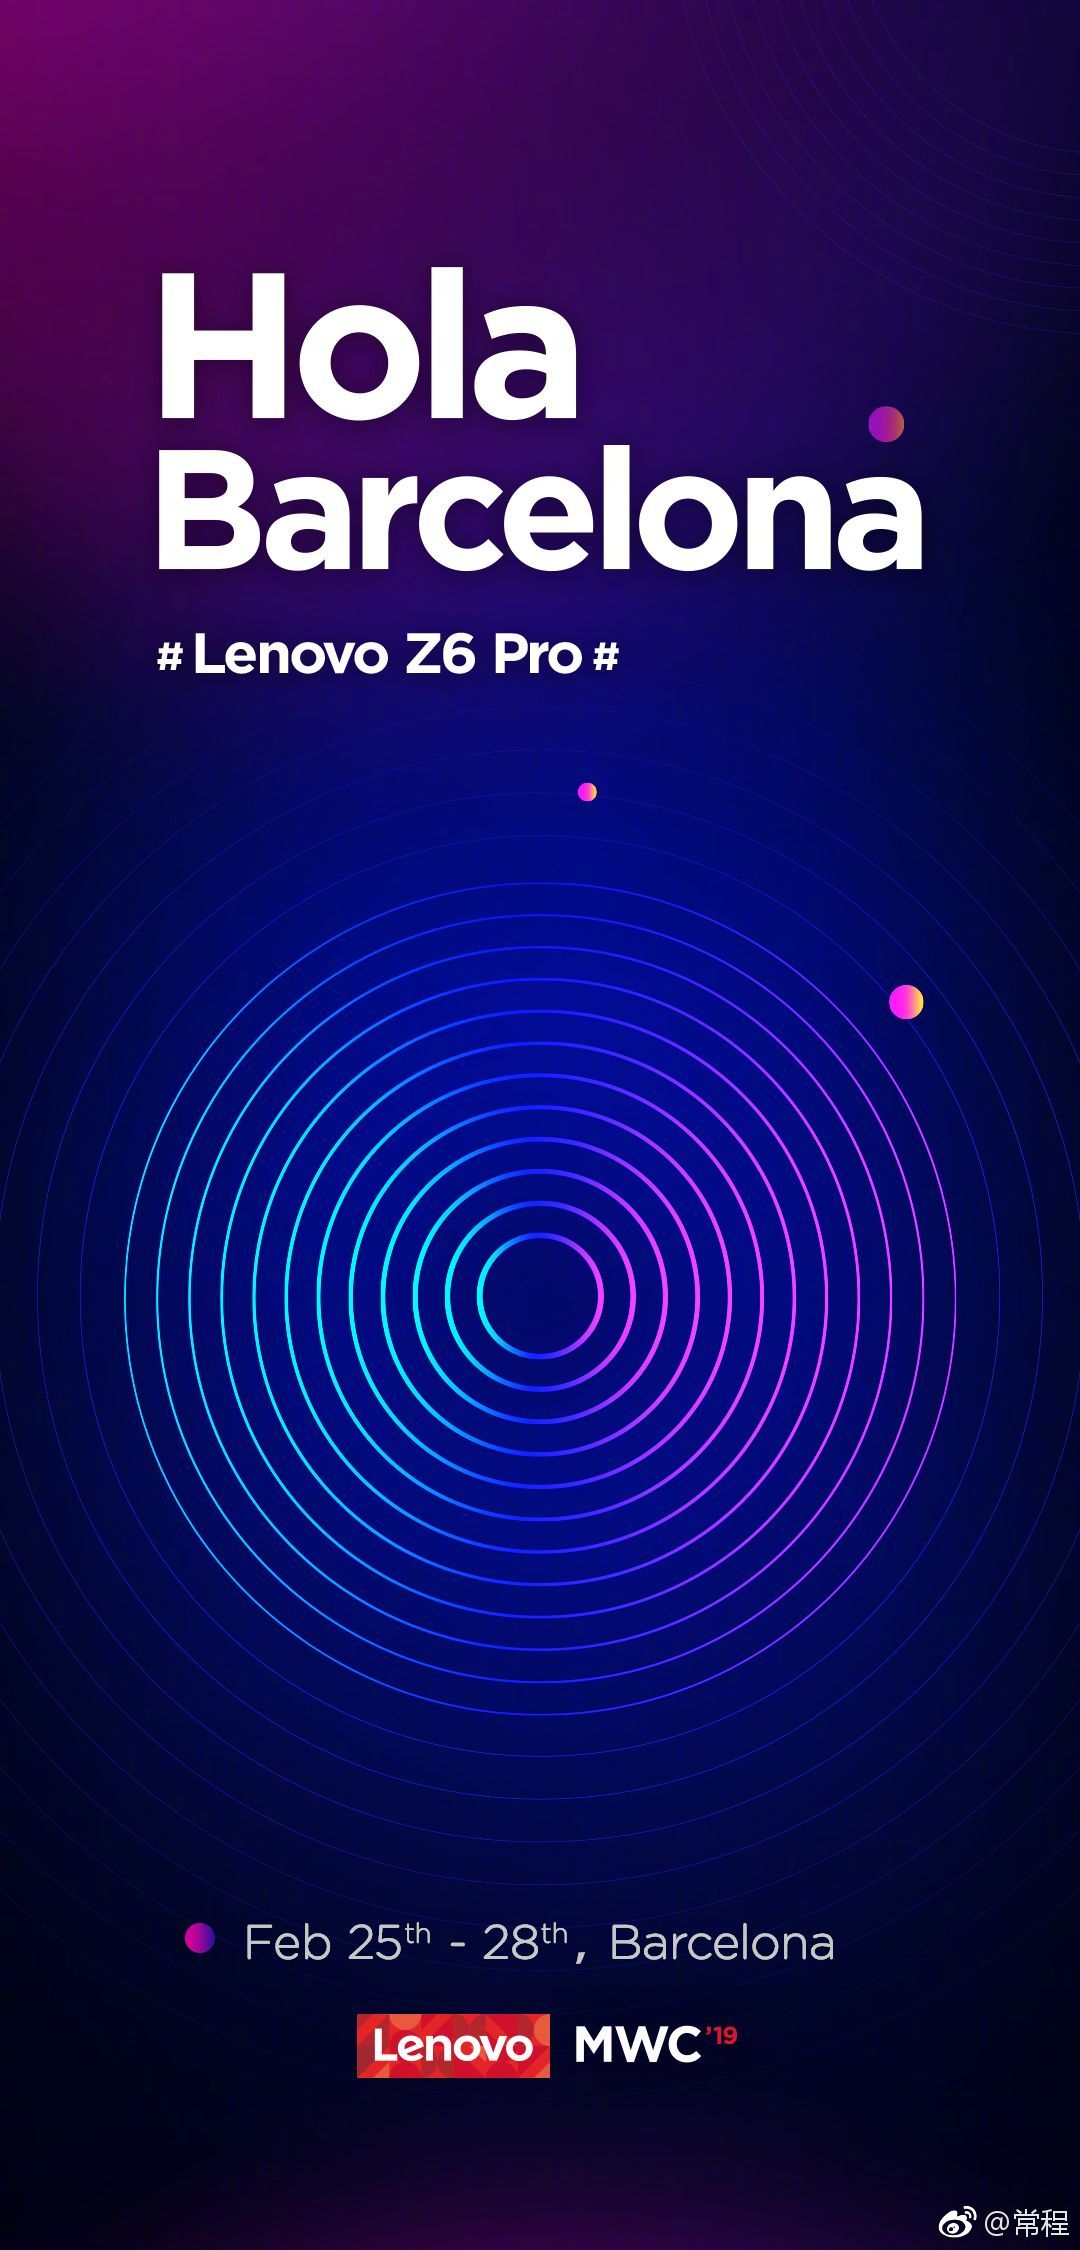 Lenovo Z6 Pro launching at the MWC